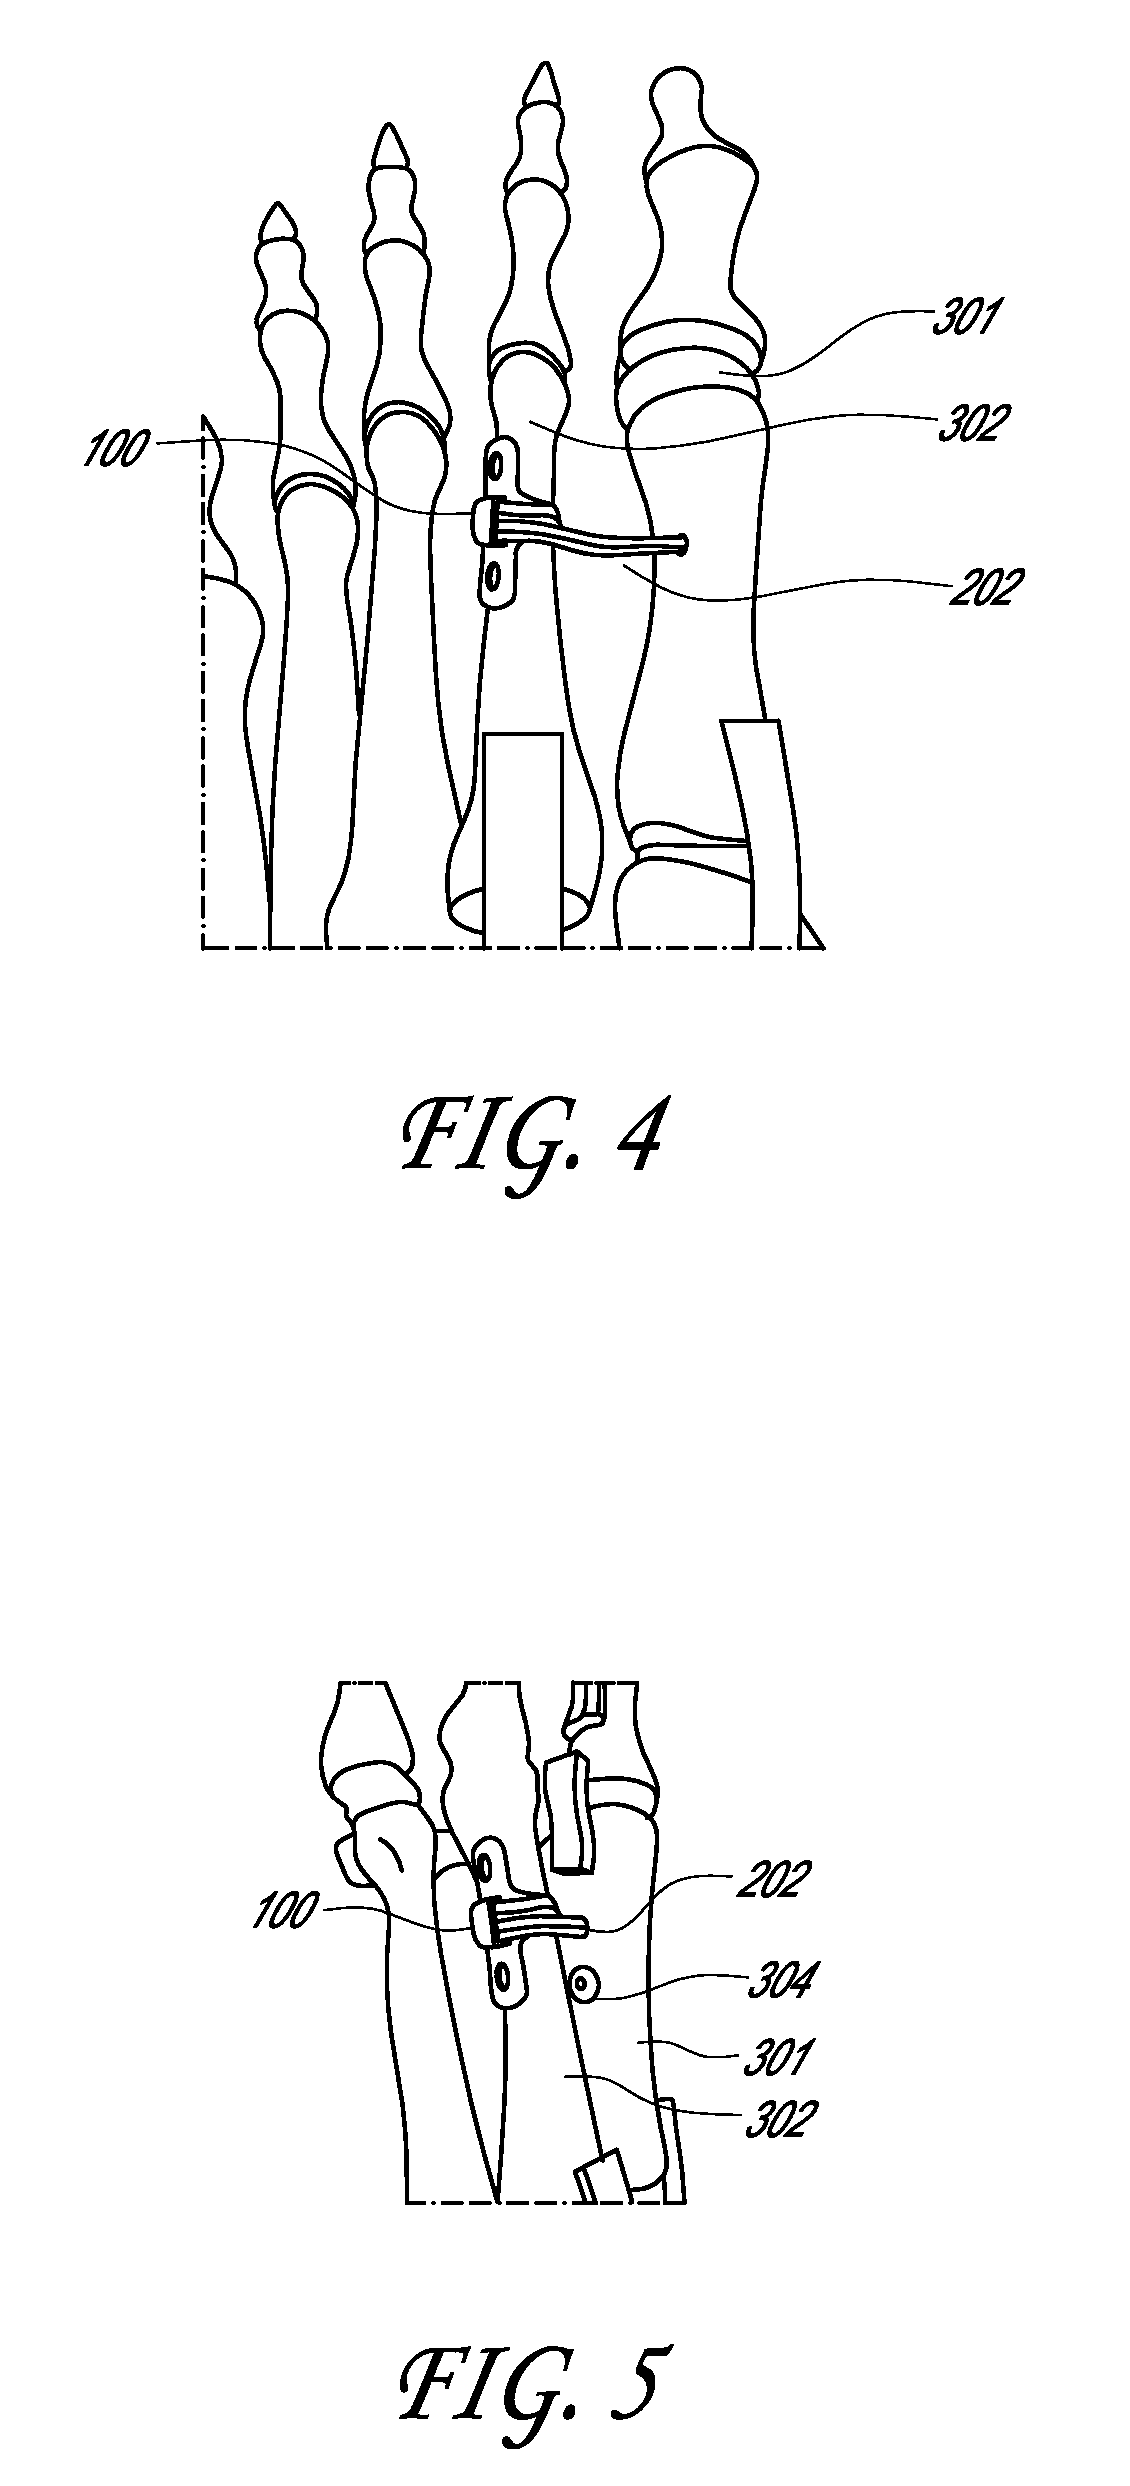 Method and device for reducing angular bone deformity using a bone stabilization plate and cerclage material